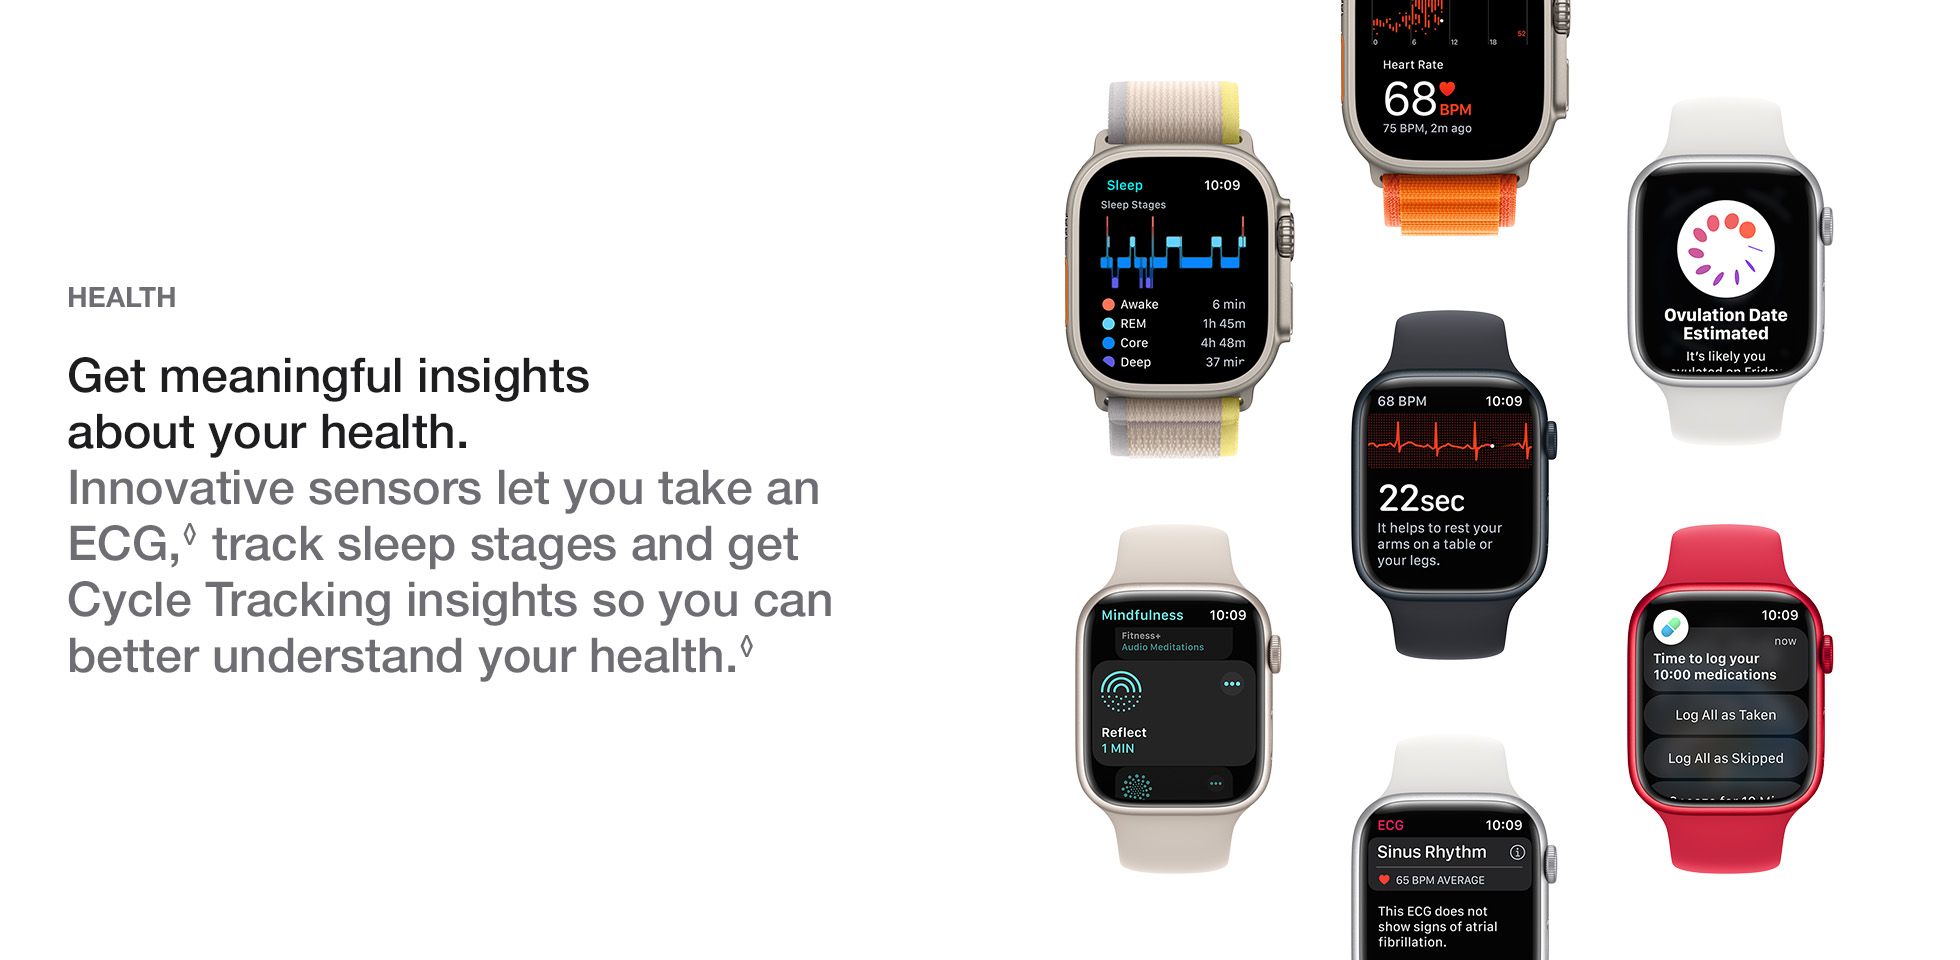 apple watch health. Get meaningful insights about your health. Innovative sensors let you take an ECG,◊ track sleep stages and get Cycle Tracking insights so you can better understand your health.◊